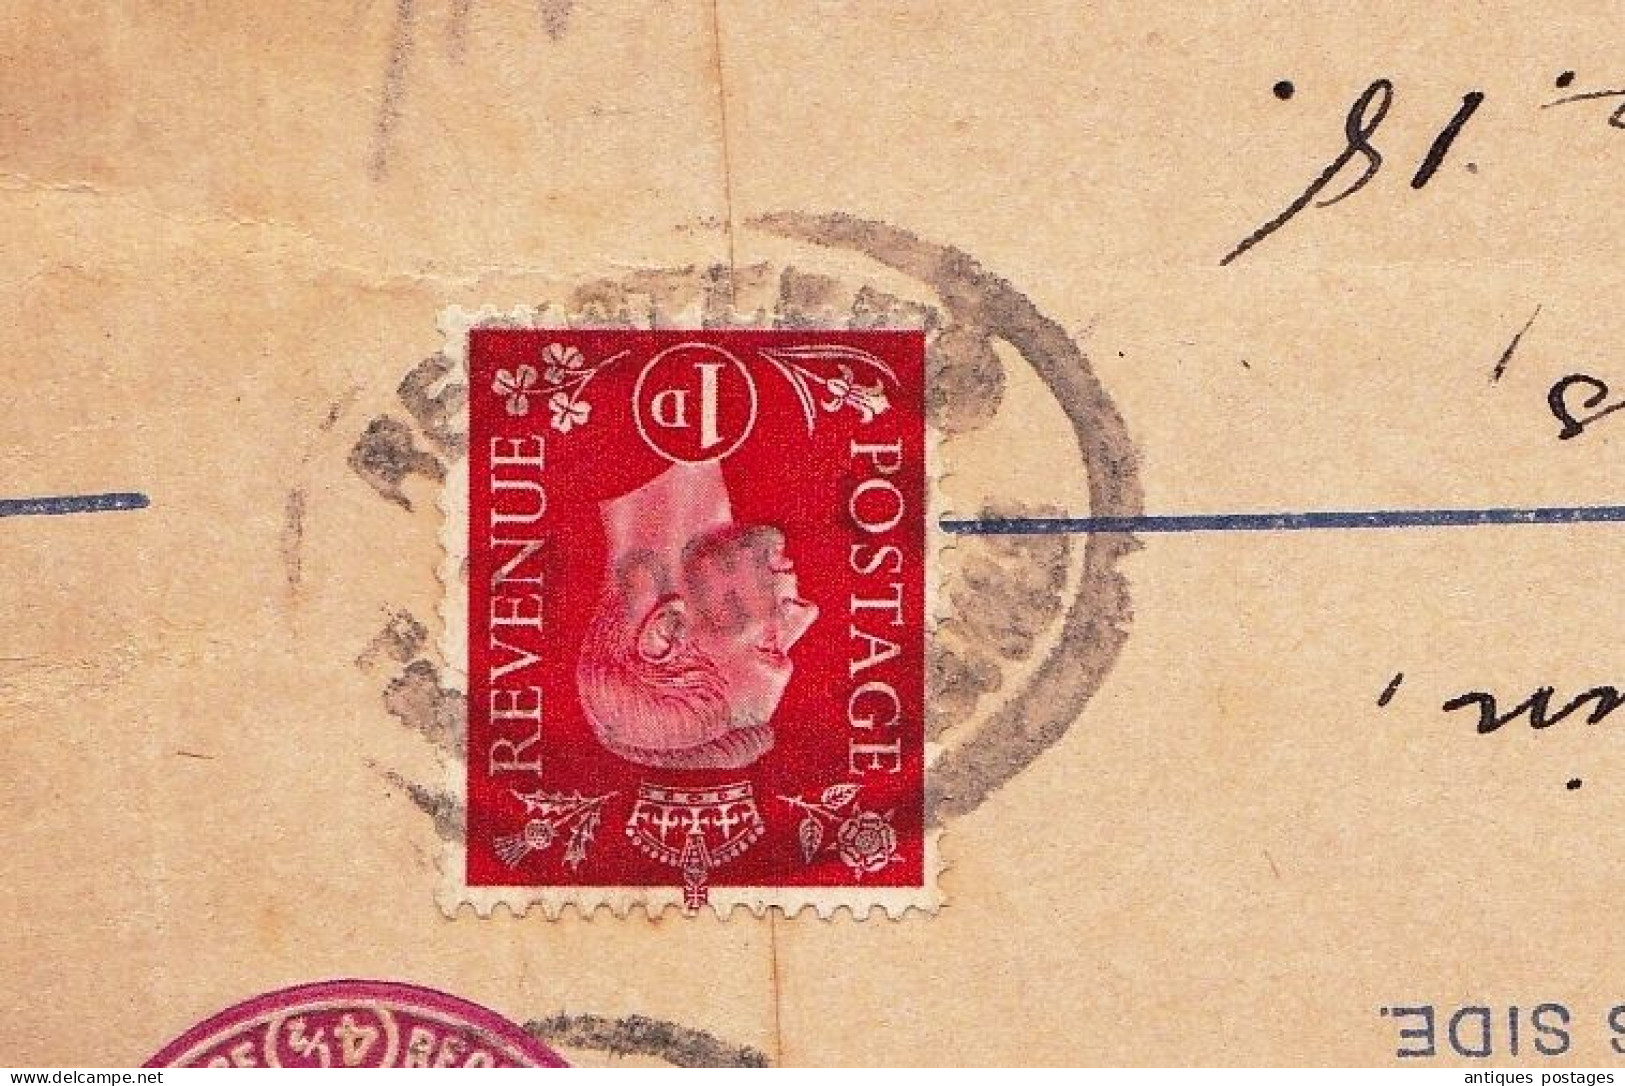 Registered Letter Paddington Anvers Antwerpen Belgique REGISTRATION THREE PENCE - POSTAGE THREE HALFPENCE (4 1/2) - Stamped Stationery, Airletters & Aerogrammes